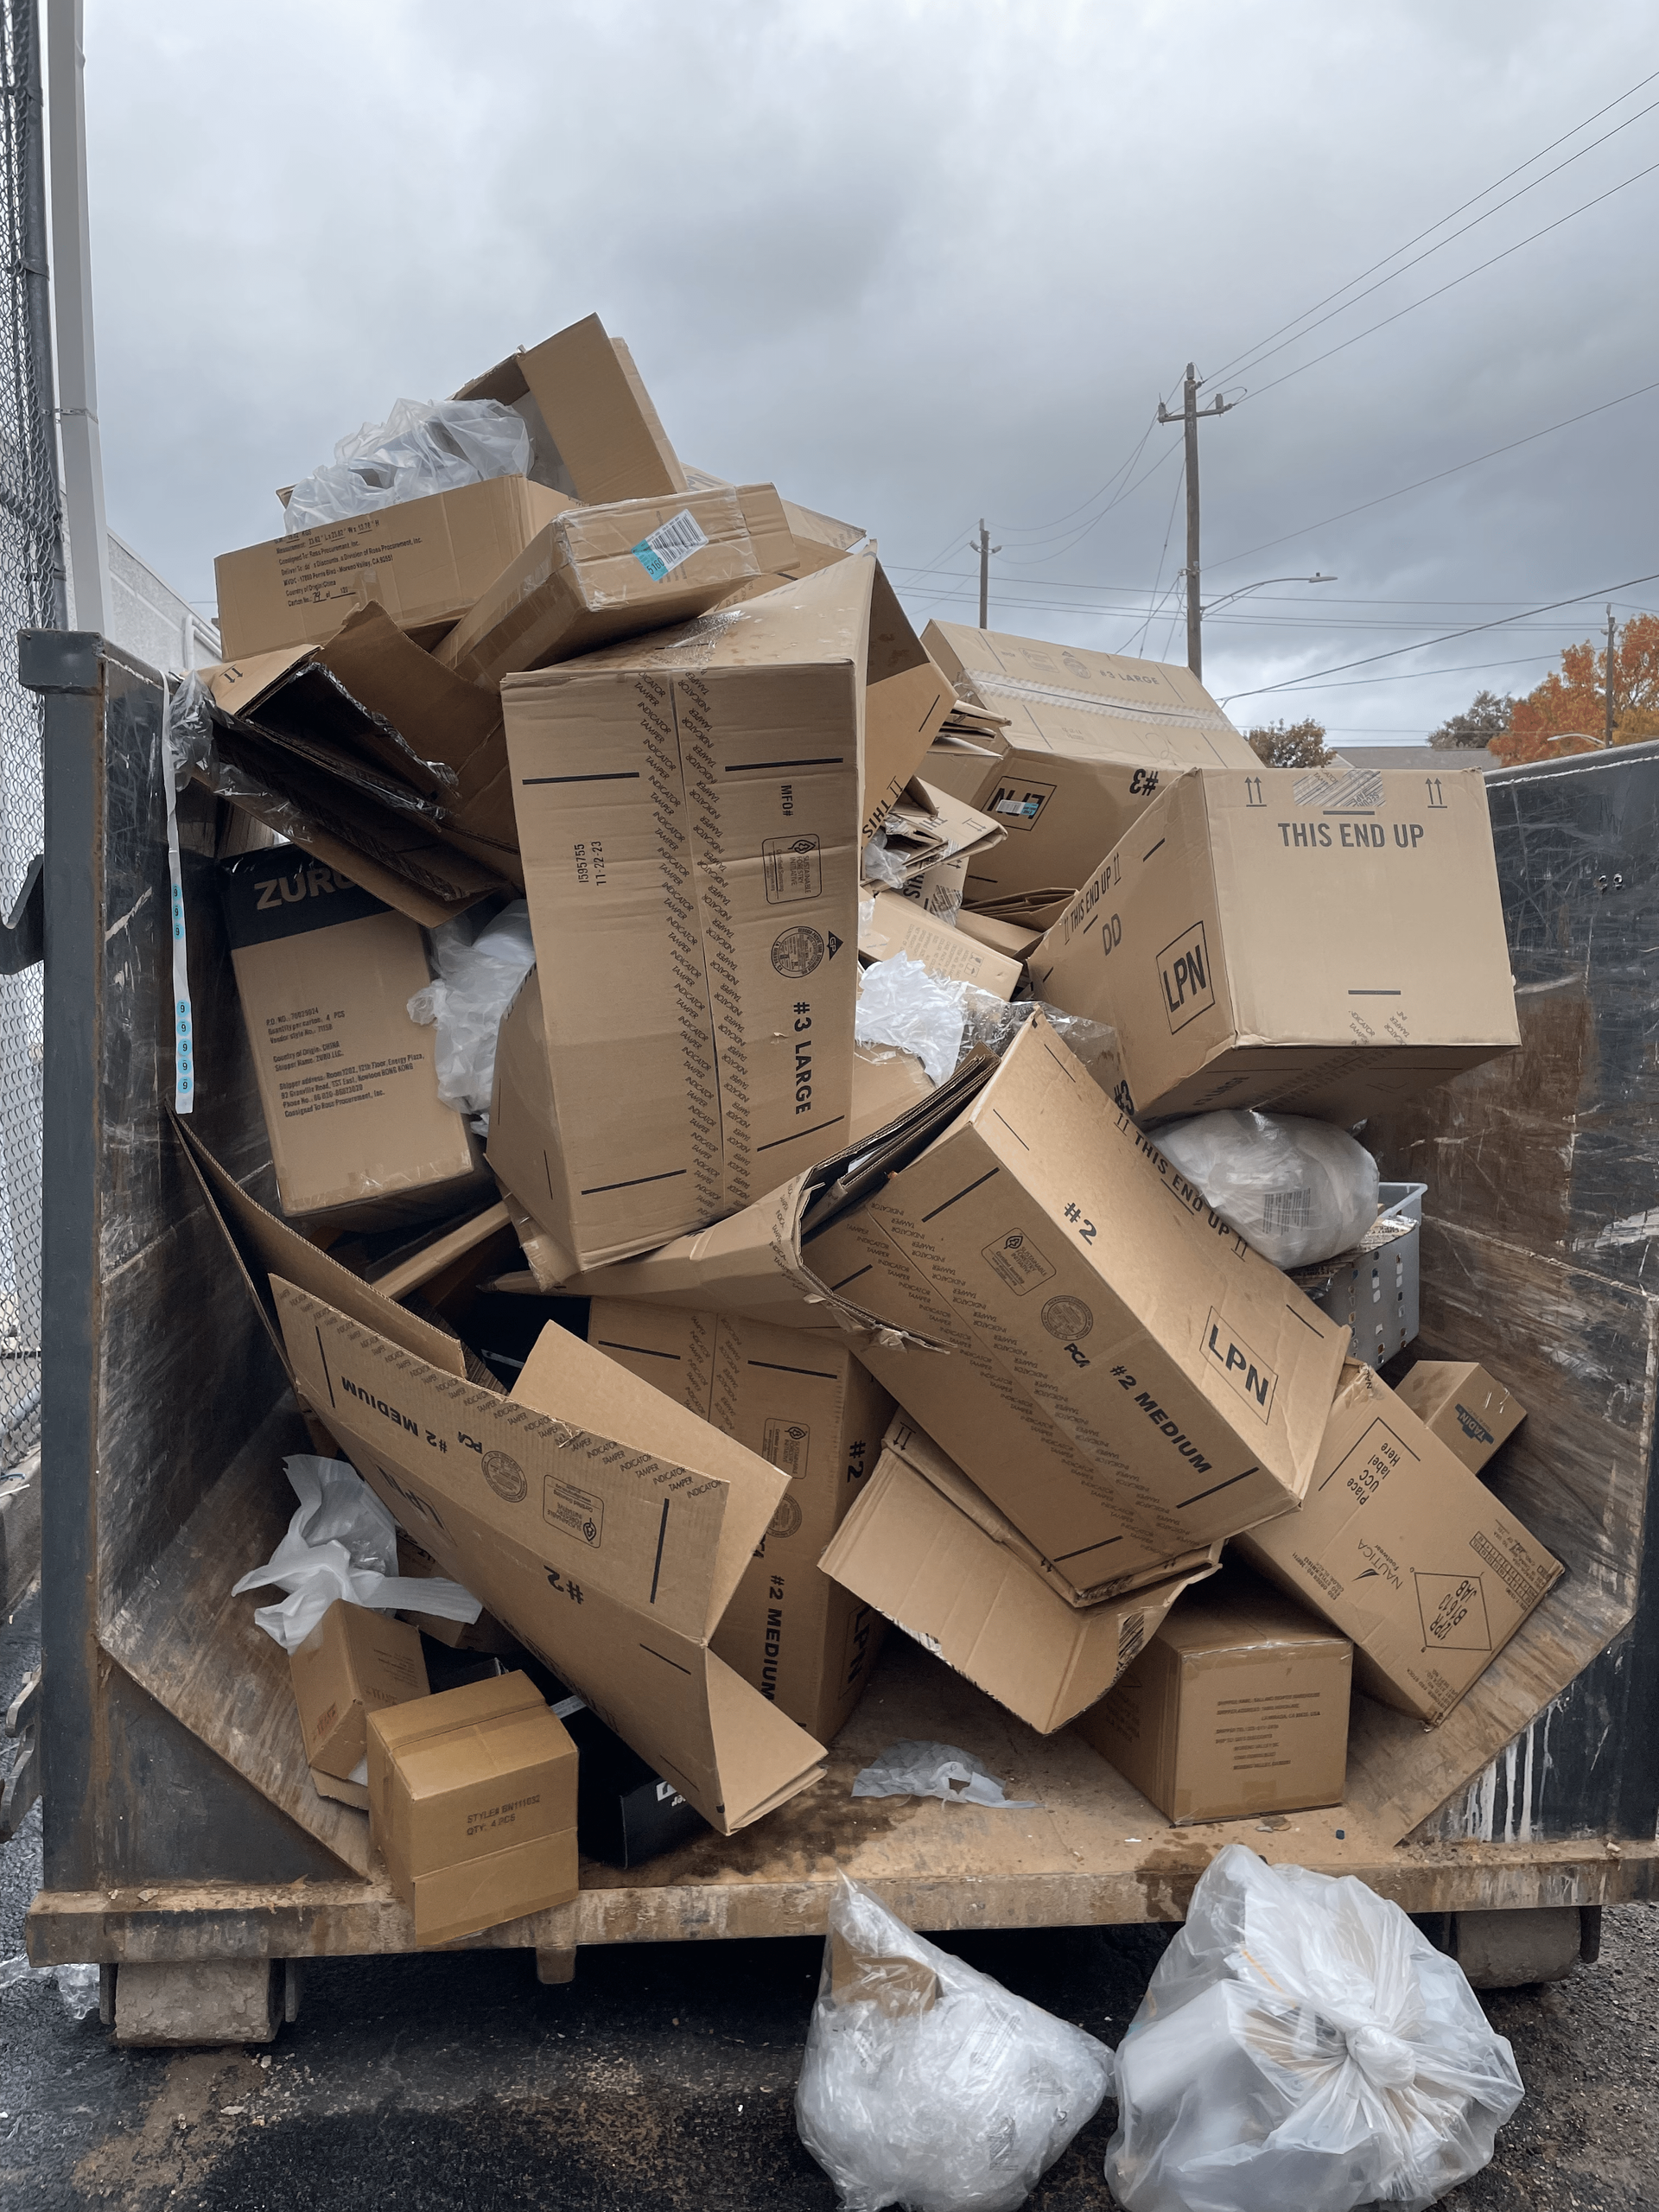 a dumpster filled with cardboard boxes and plastic bags .